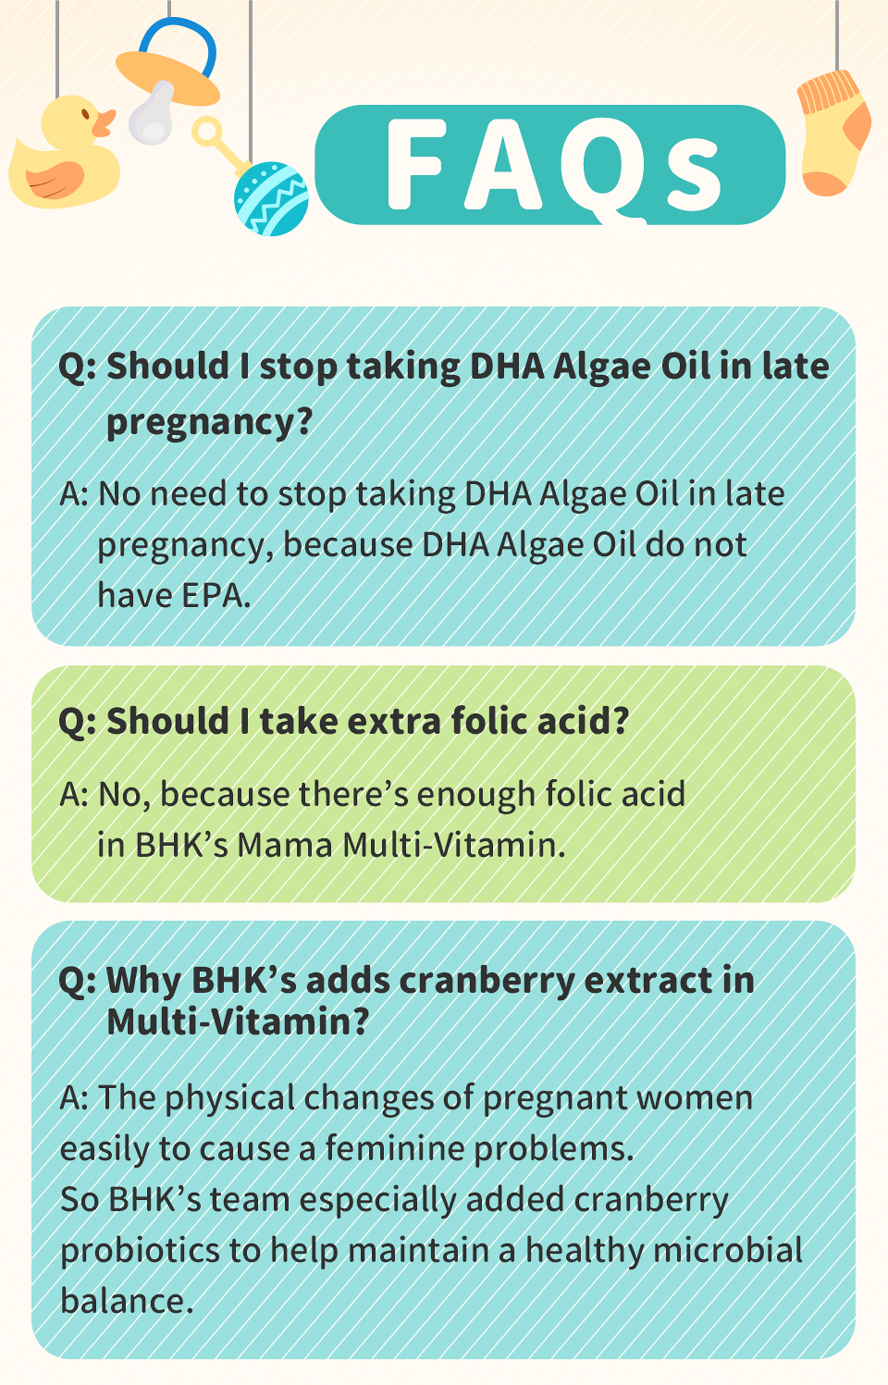 BHK's DHA Algae Multi-vitamin  provide a healthy, nutritious supplement to baby and mom.